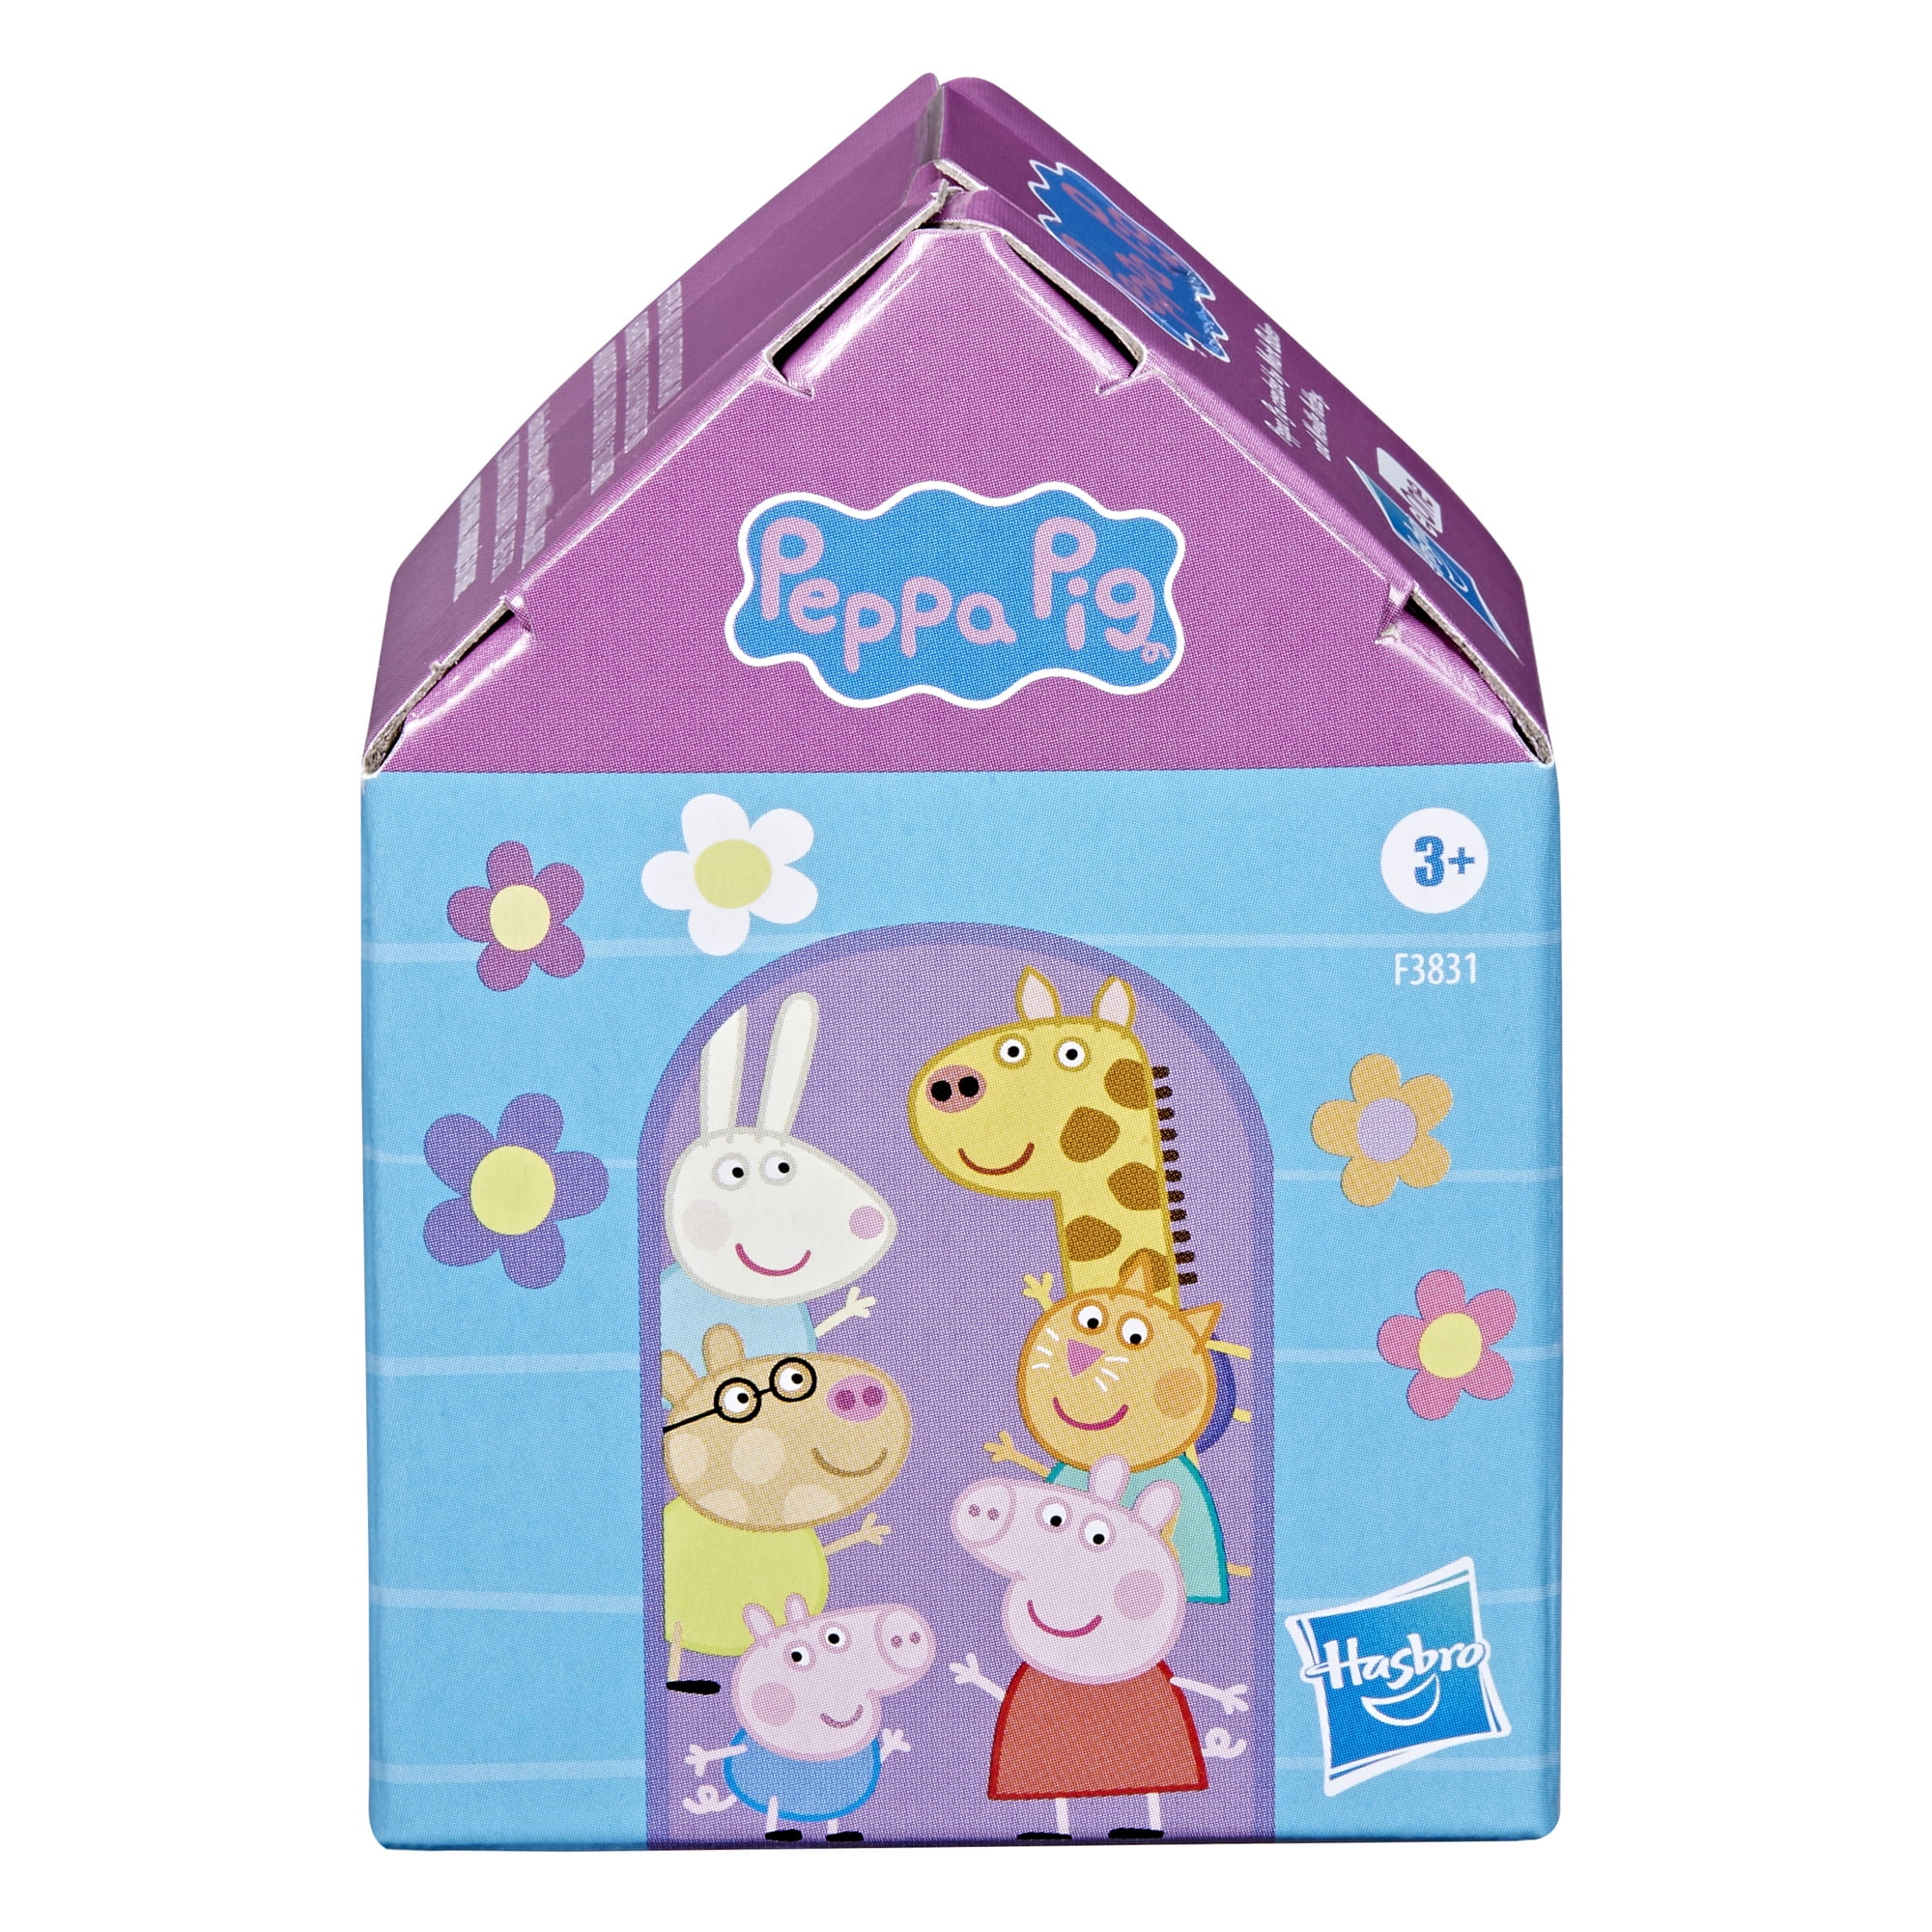 Peppa Pig Peppa’s Clubhouse Surprise, 1 of 12 Surprise Figures, Great Easter Basket Toys